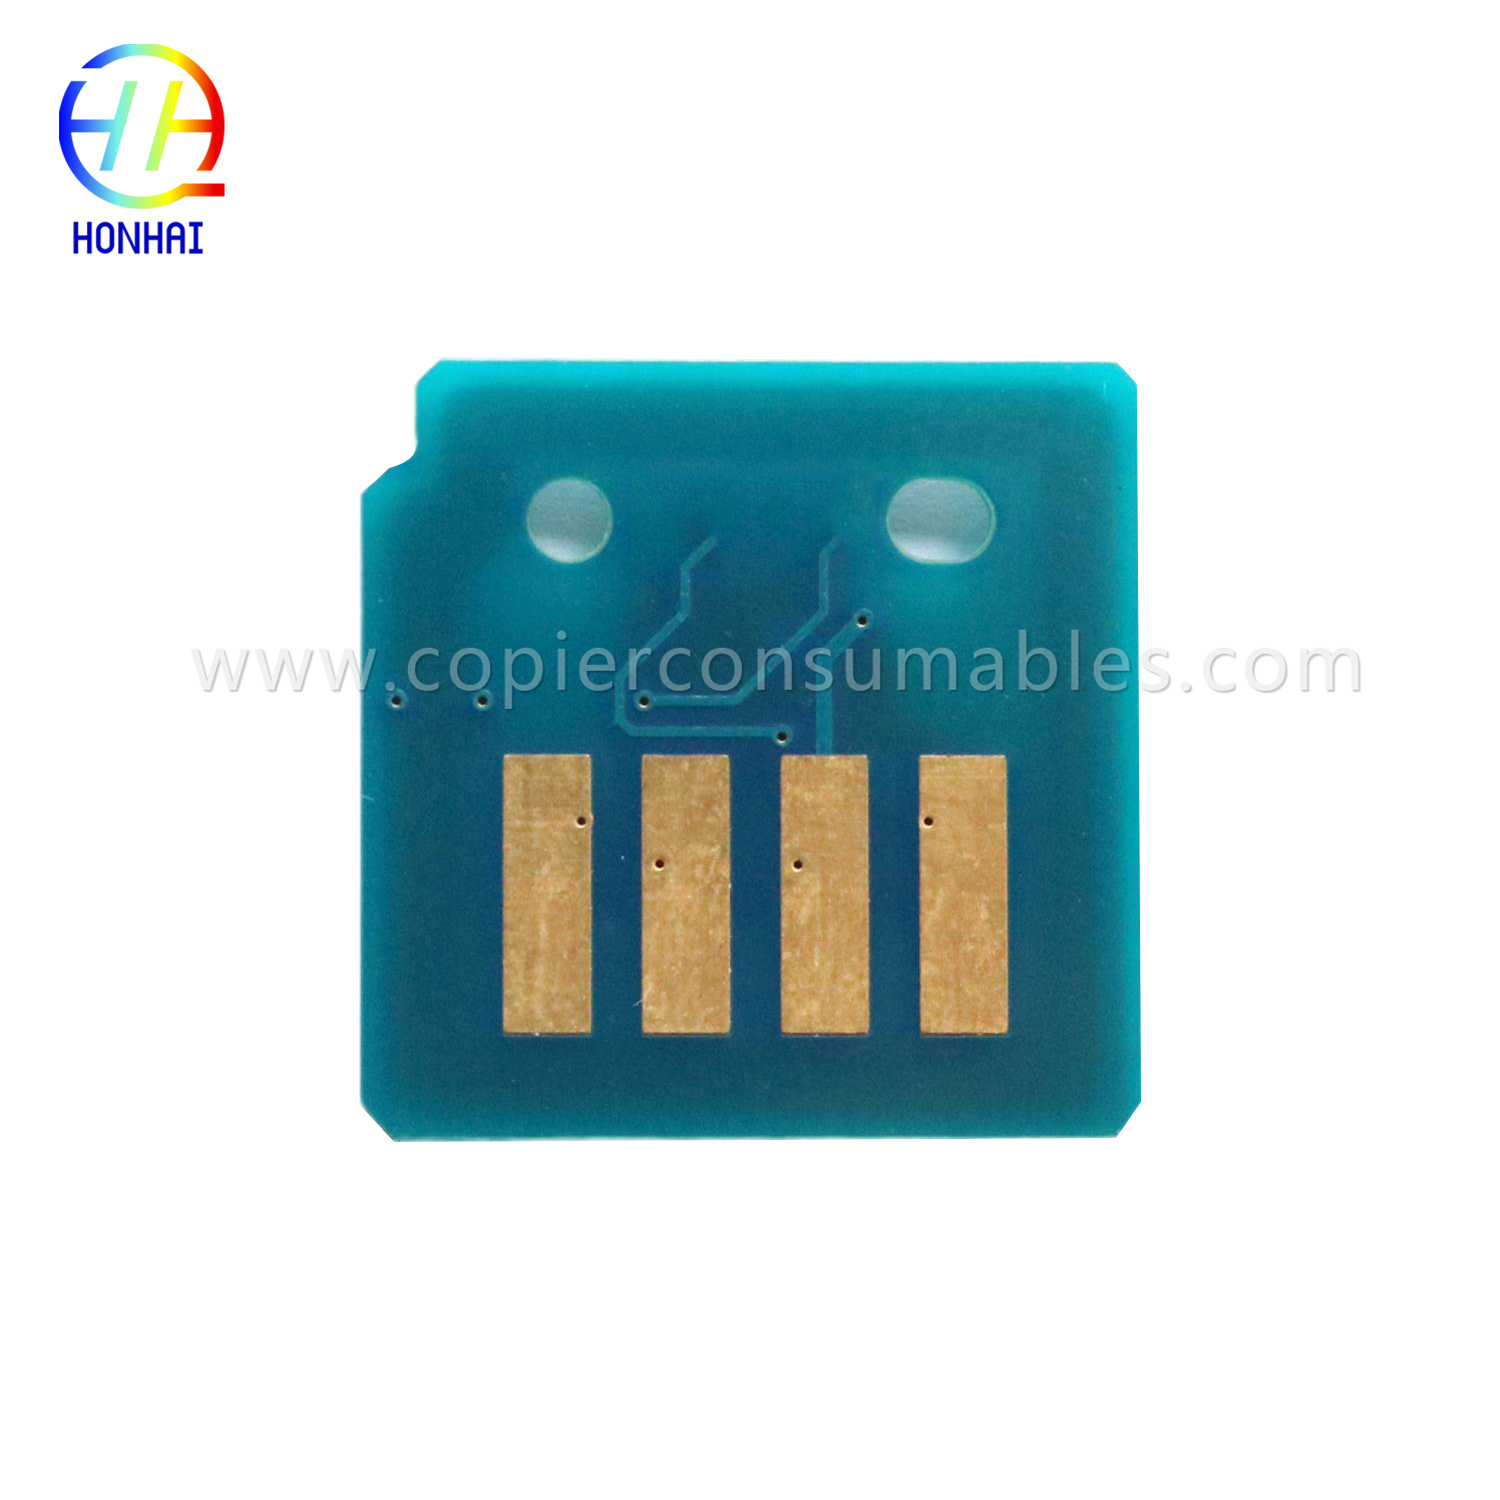 Tonercartridge Chip voor Xerox Phaser 7525 7530 7535 7545 7556 7830 7835 7845 7855 006R01517 006R01518 006R01519 006R01520